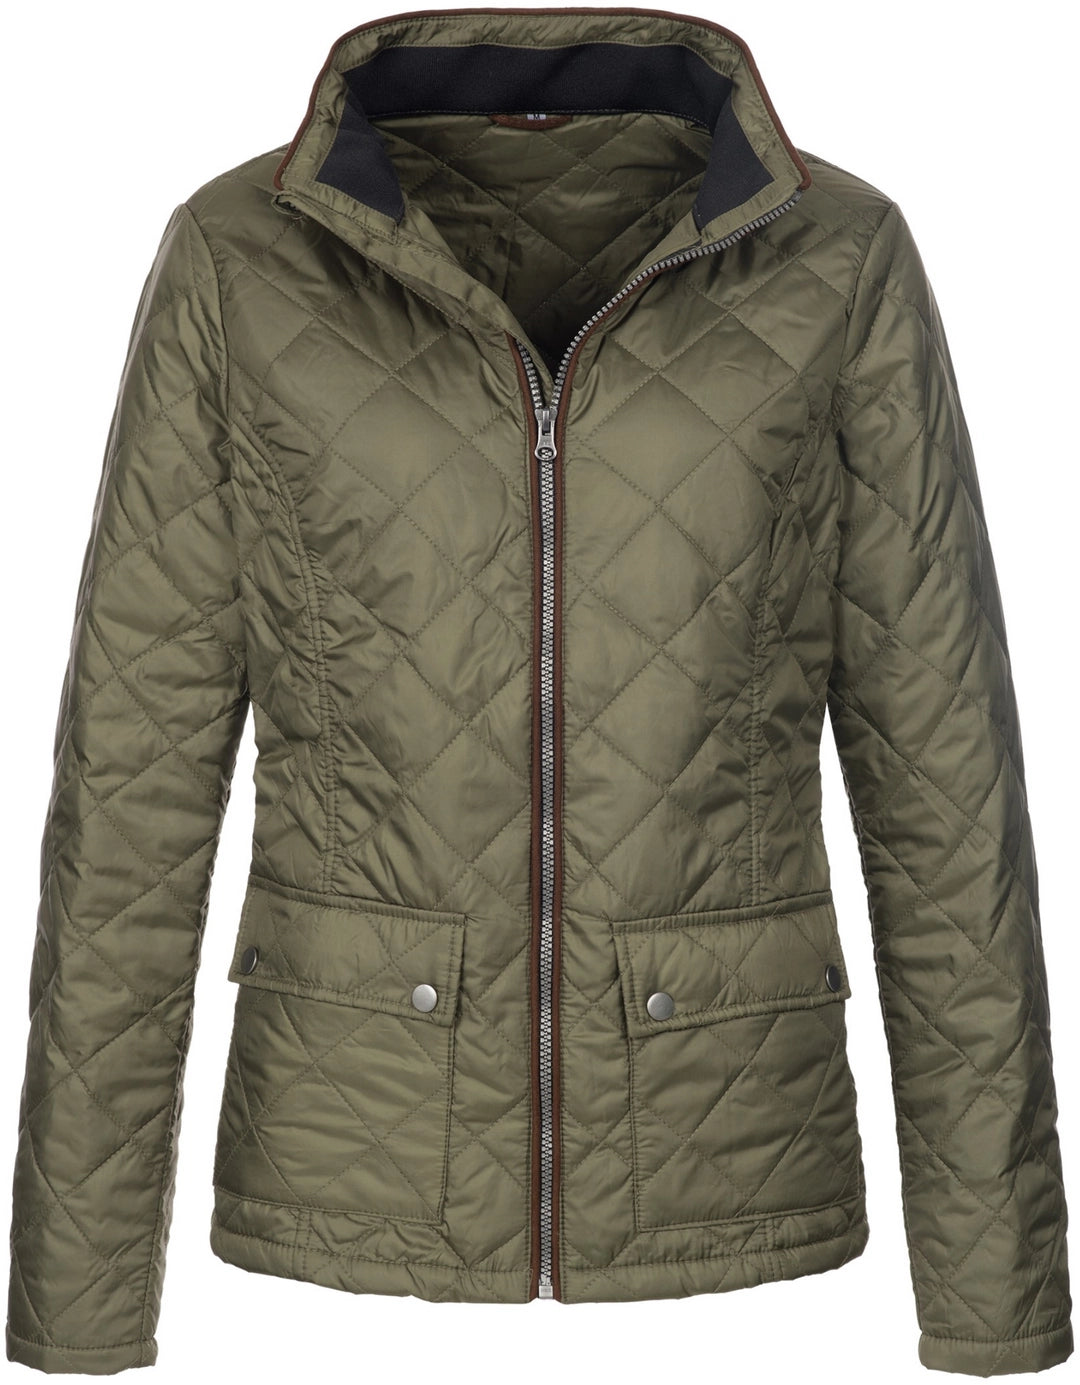 Stedman ST5360 Ladies Quilted Jacket - COOZO